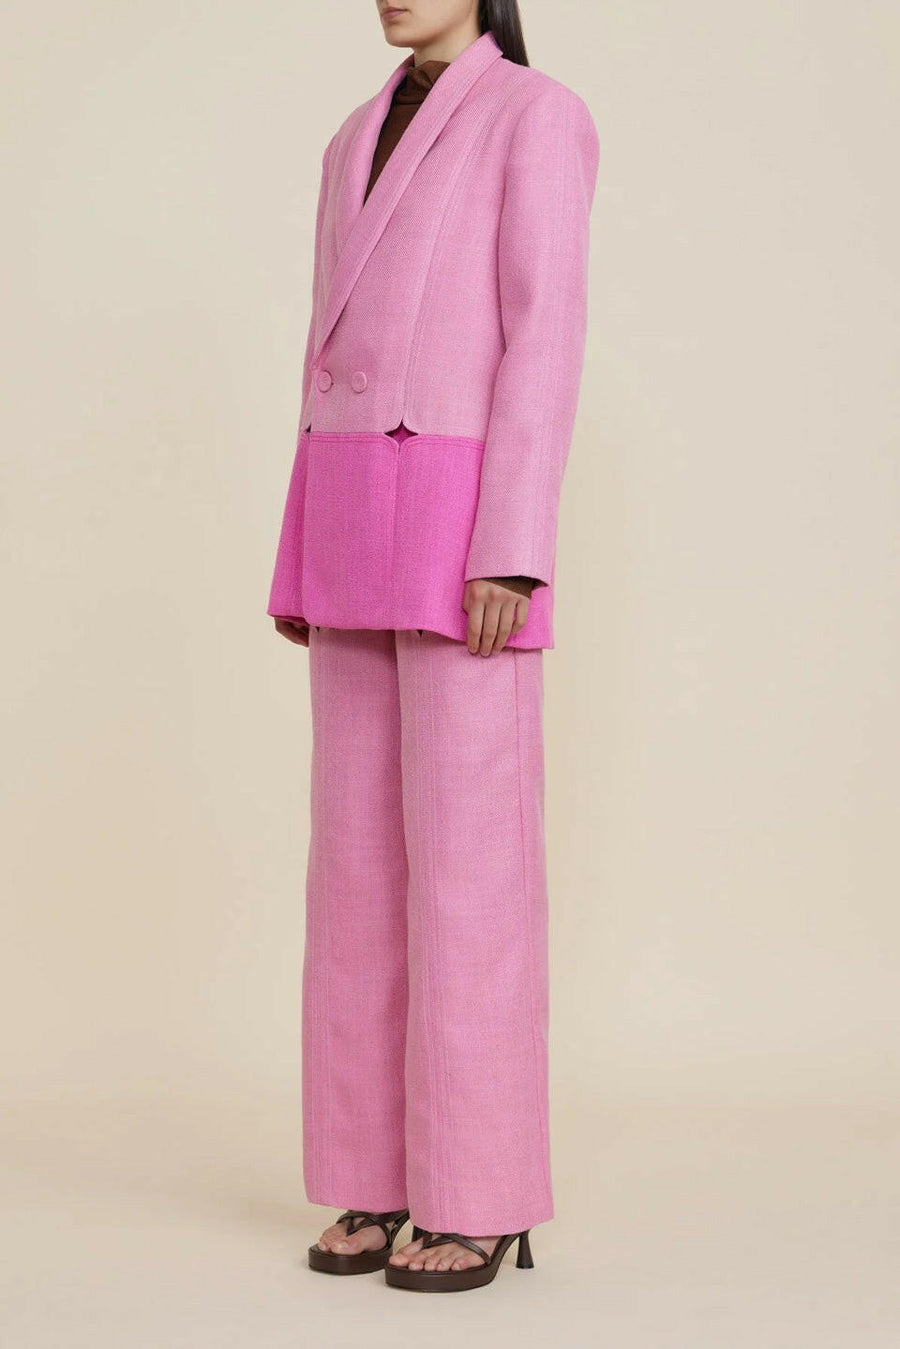 acler ashmore jacket pink figure side